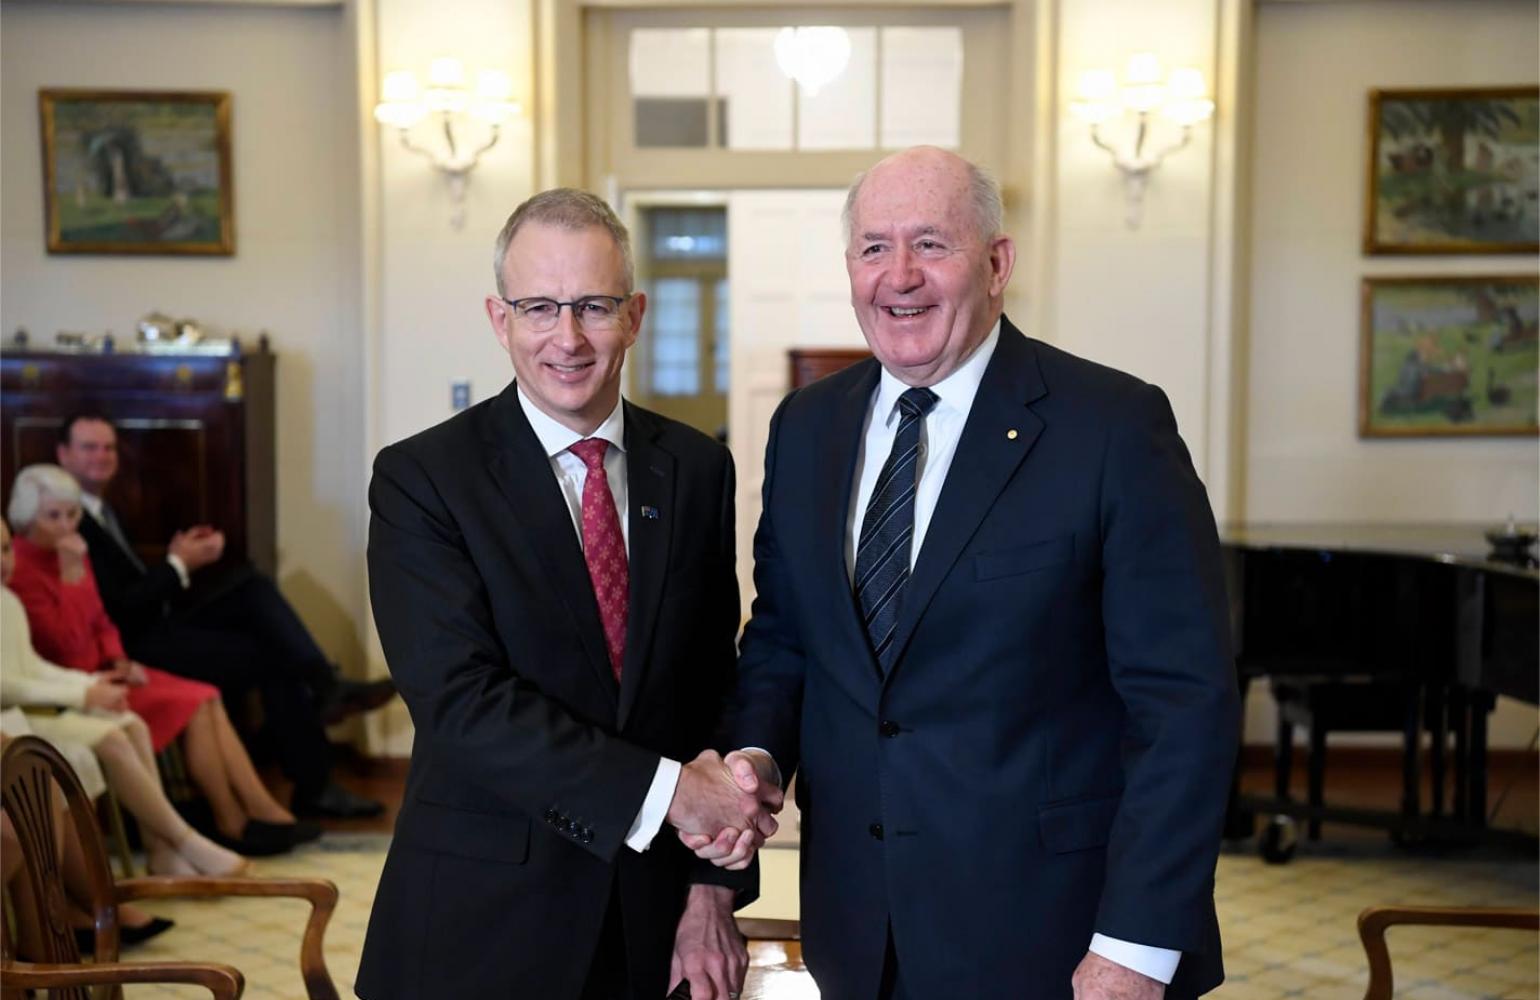 Paul Fletcher being sworn in by the Governor General in May 2019